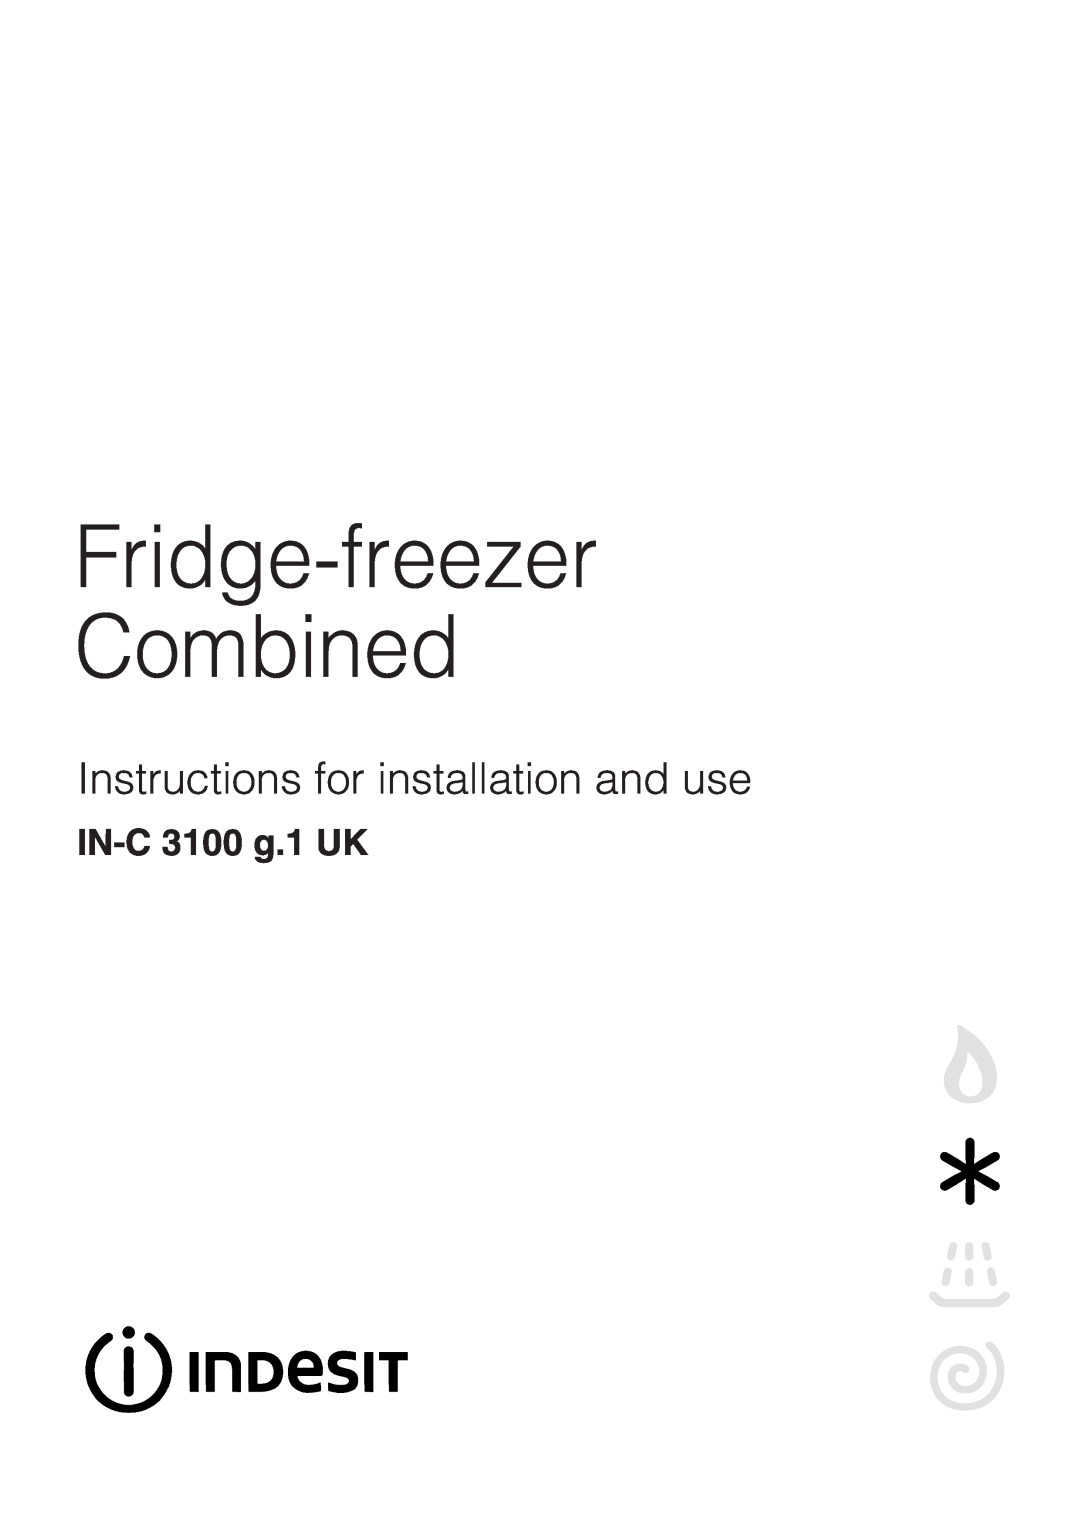 Indesit manual IN-C 3100 g.1 UK, Fridge-freezer Combined, Instructions for installation and use 